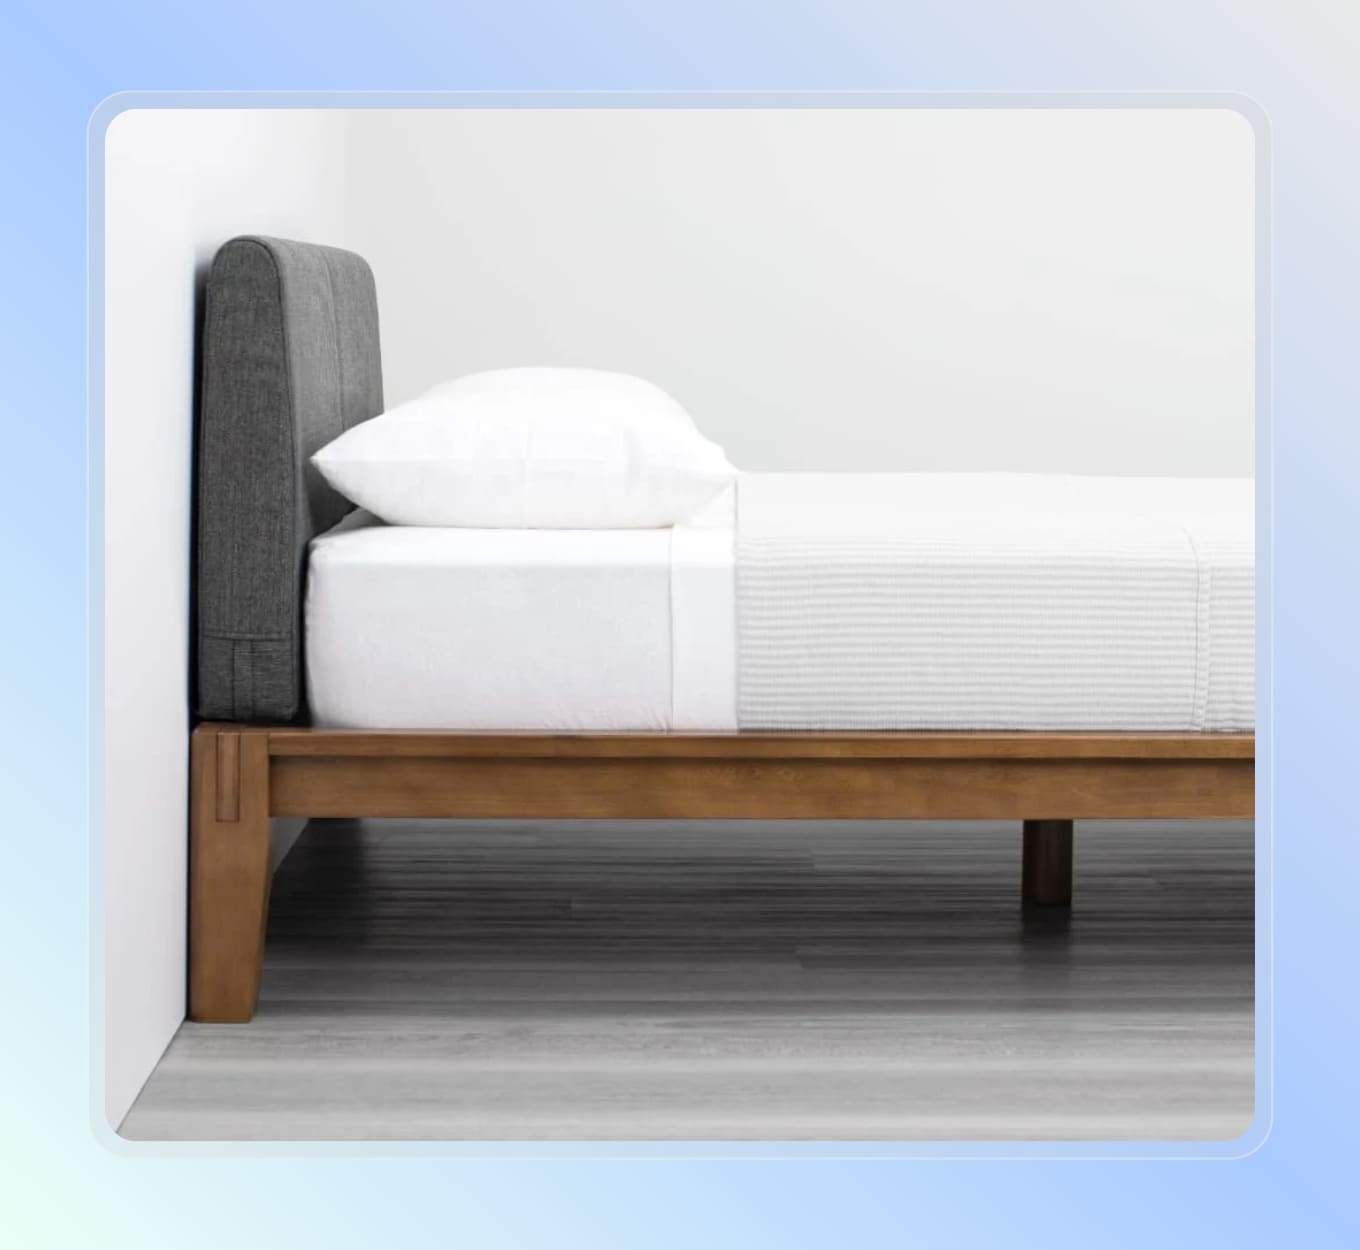 The Bed by Thuma — with pillow headboard